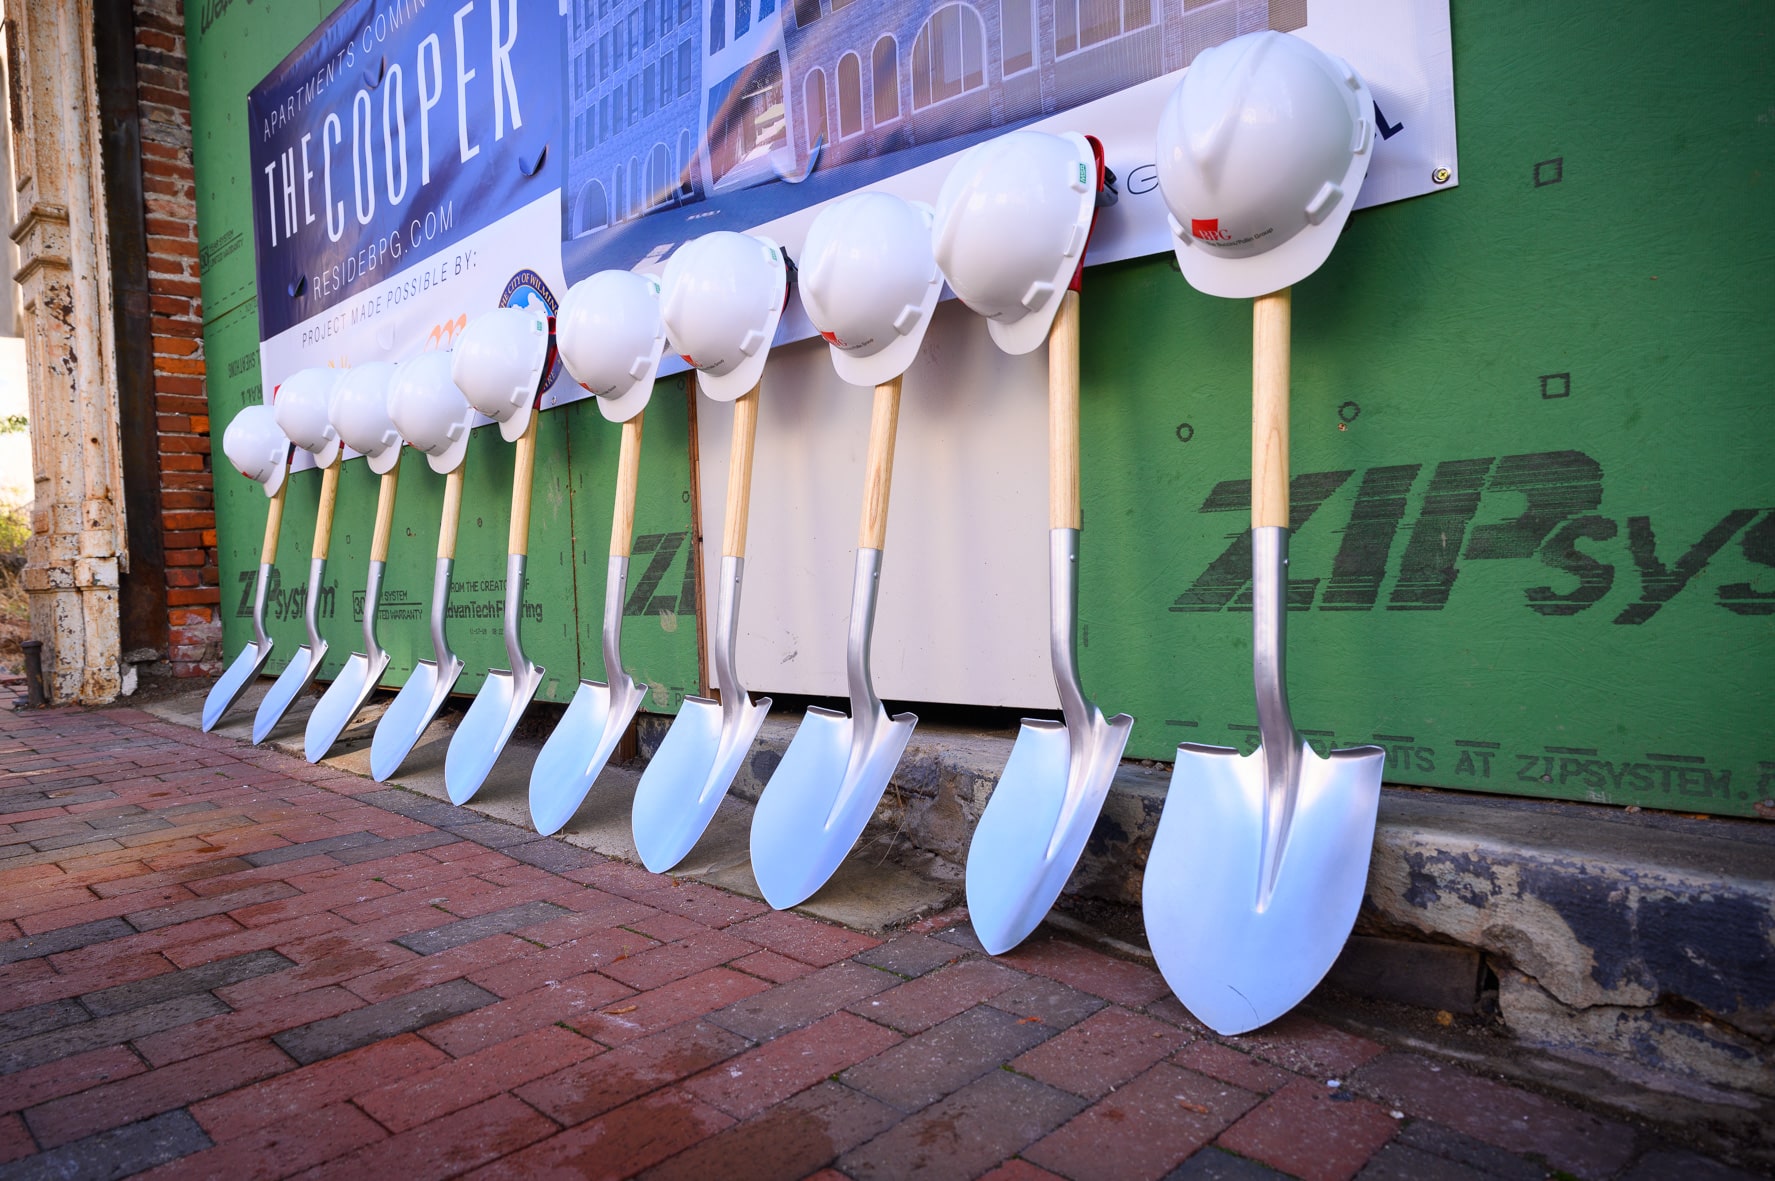 Hardhats leaning on shovels at The Cooper development site